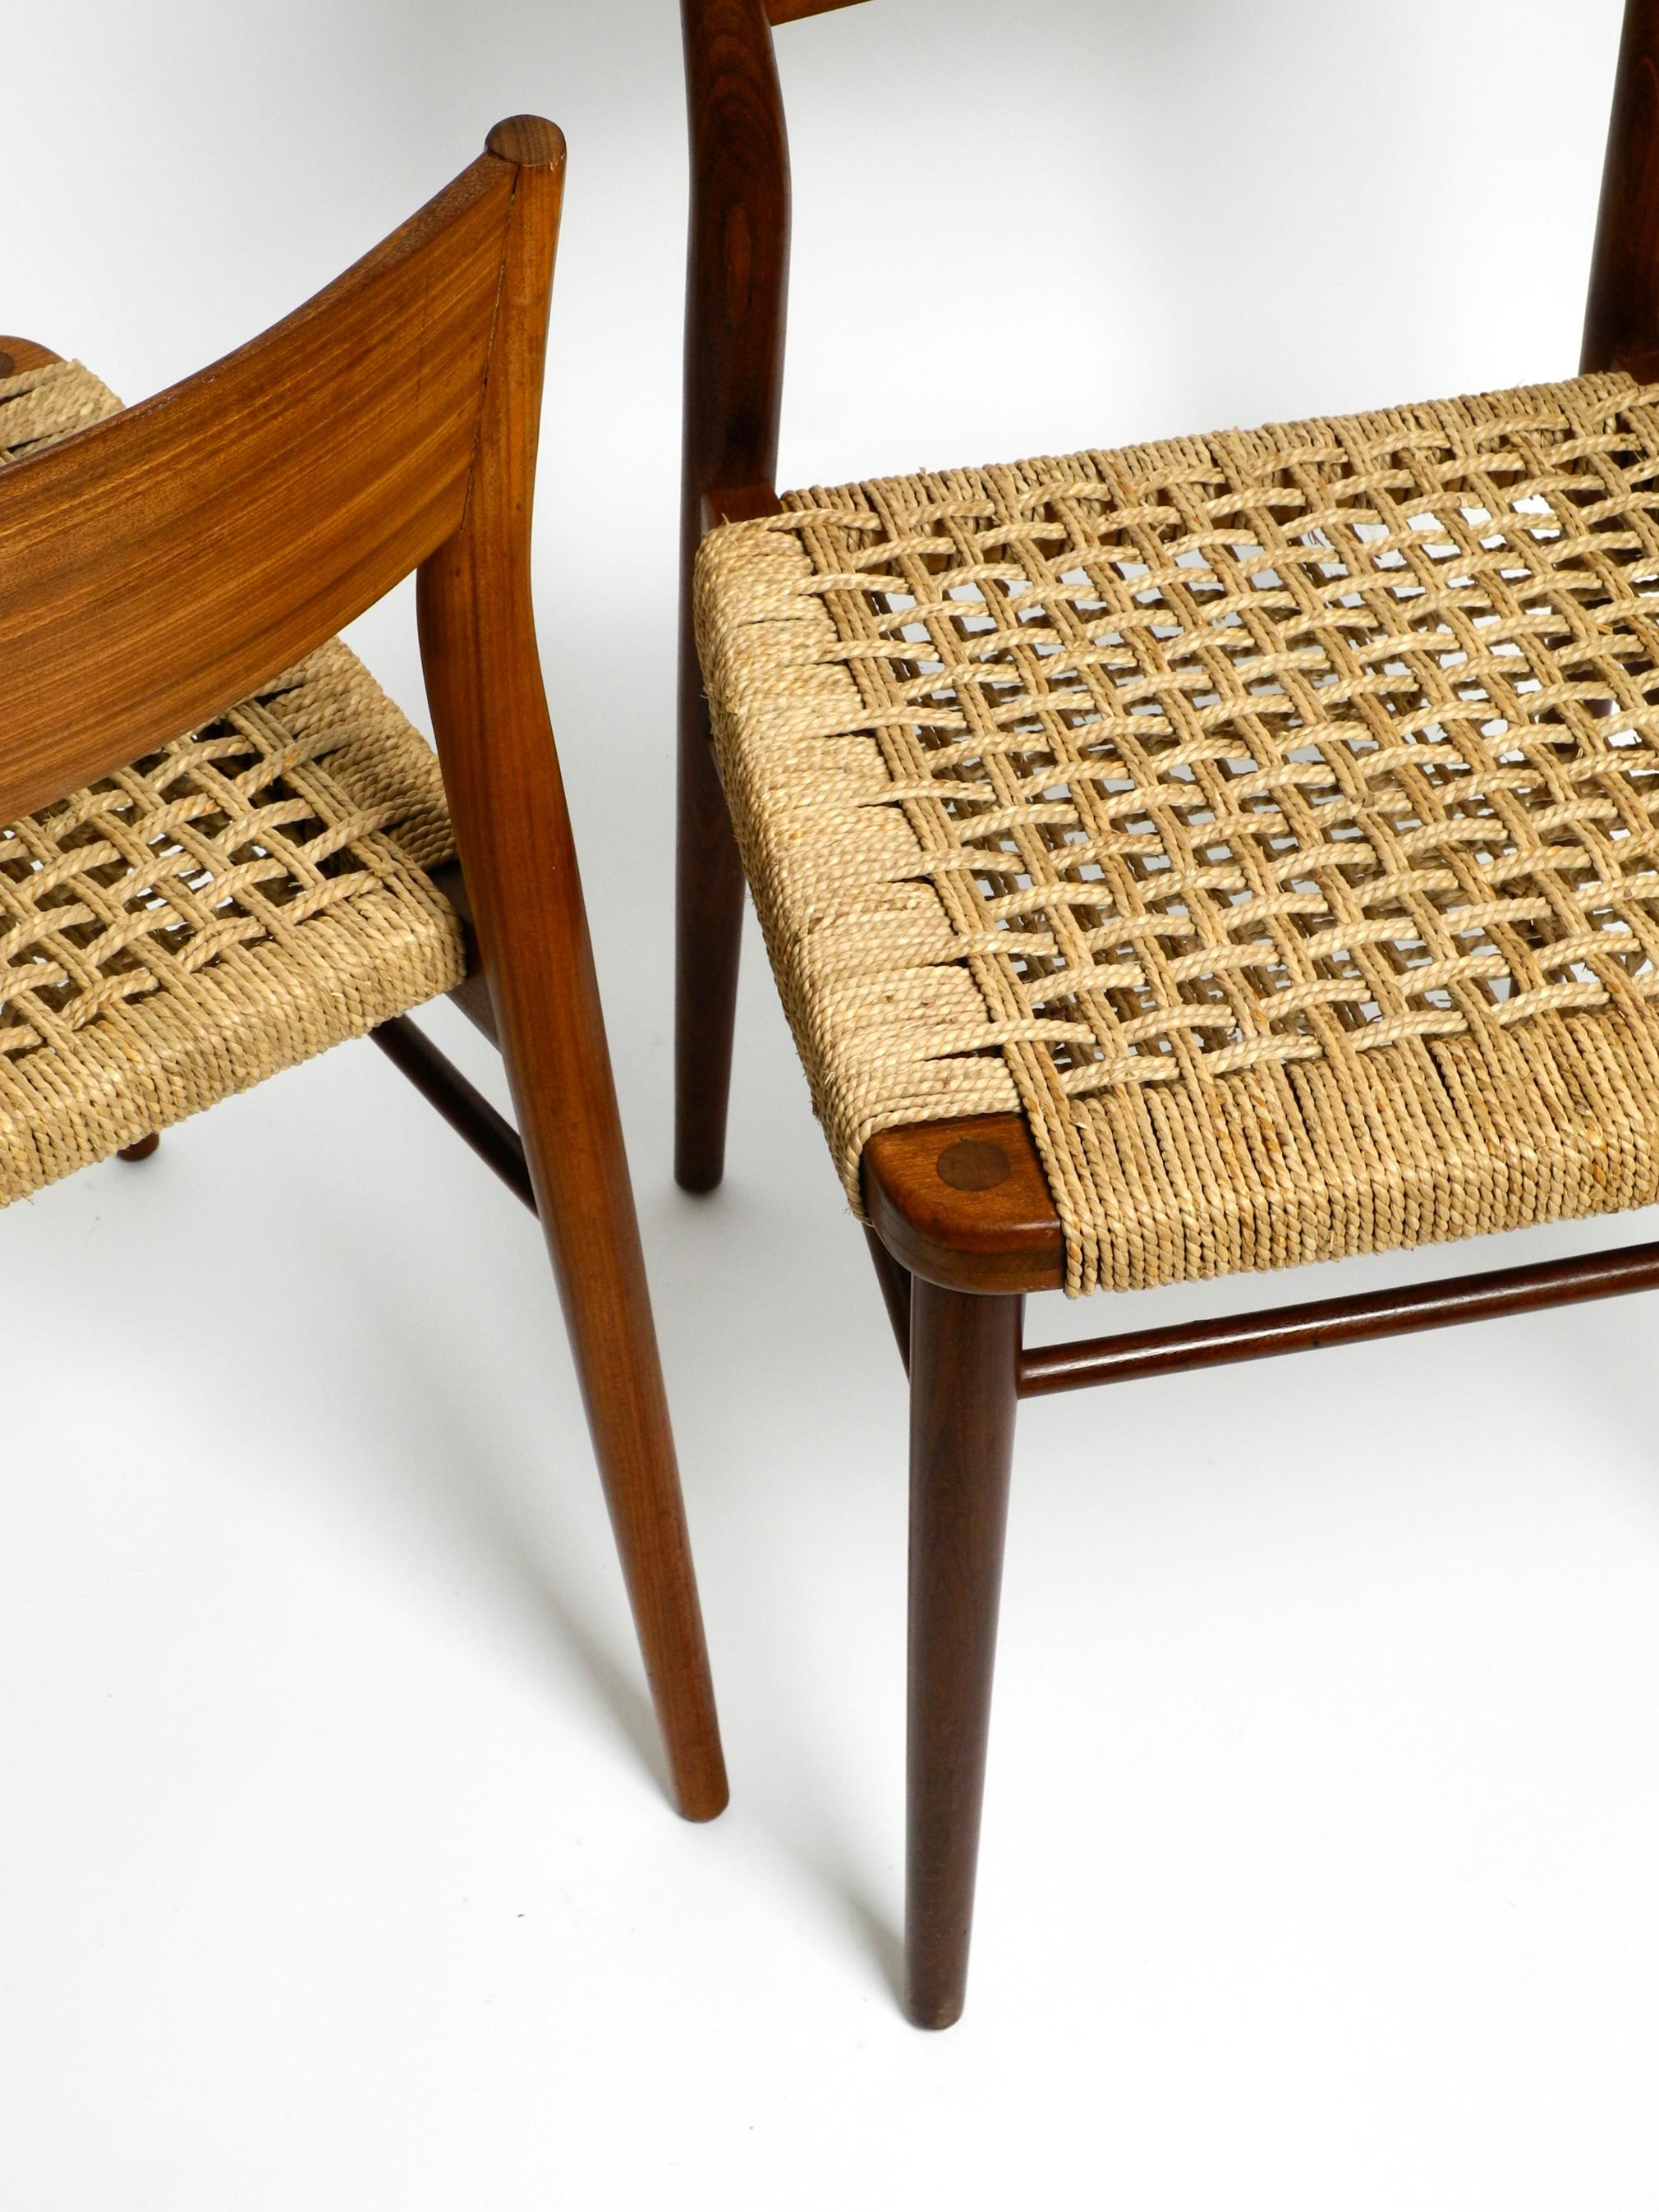 Two Original 1960s Wilkhahn Chairs Made of Walnut with Wicker Cane In Good Condition For Sale In München, DE